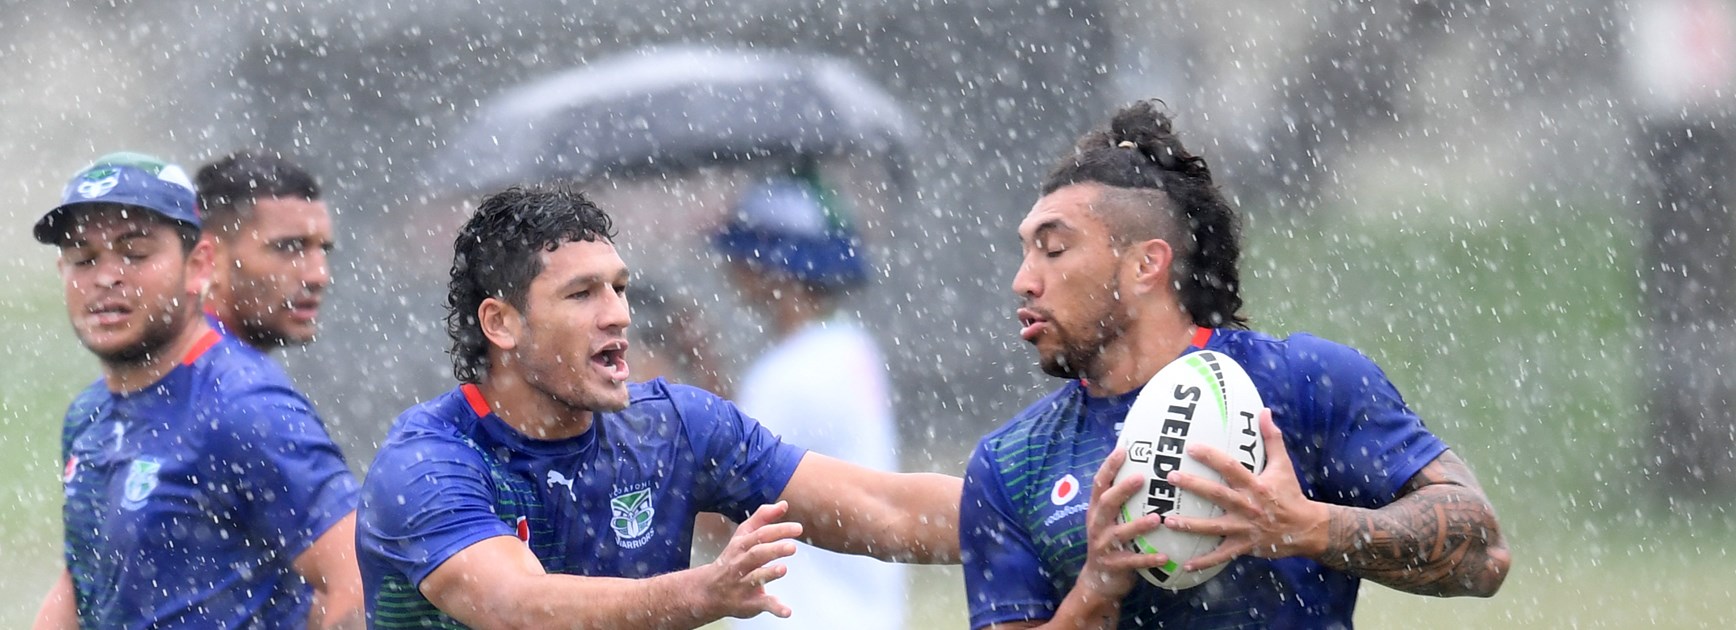 Warriors-Titans pre-season trial cancelled due to extreme weather